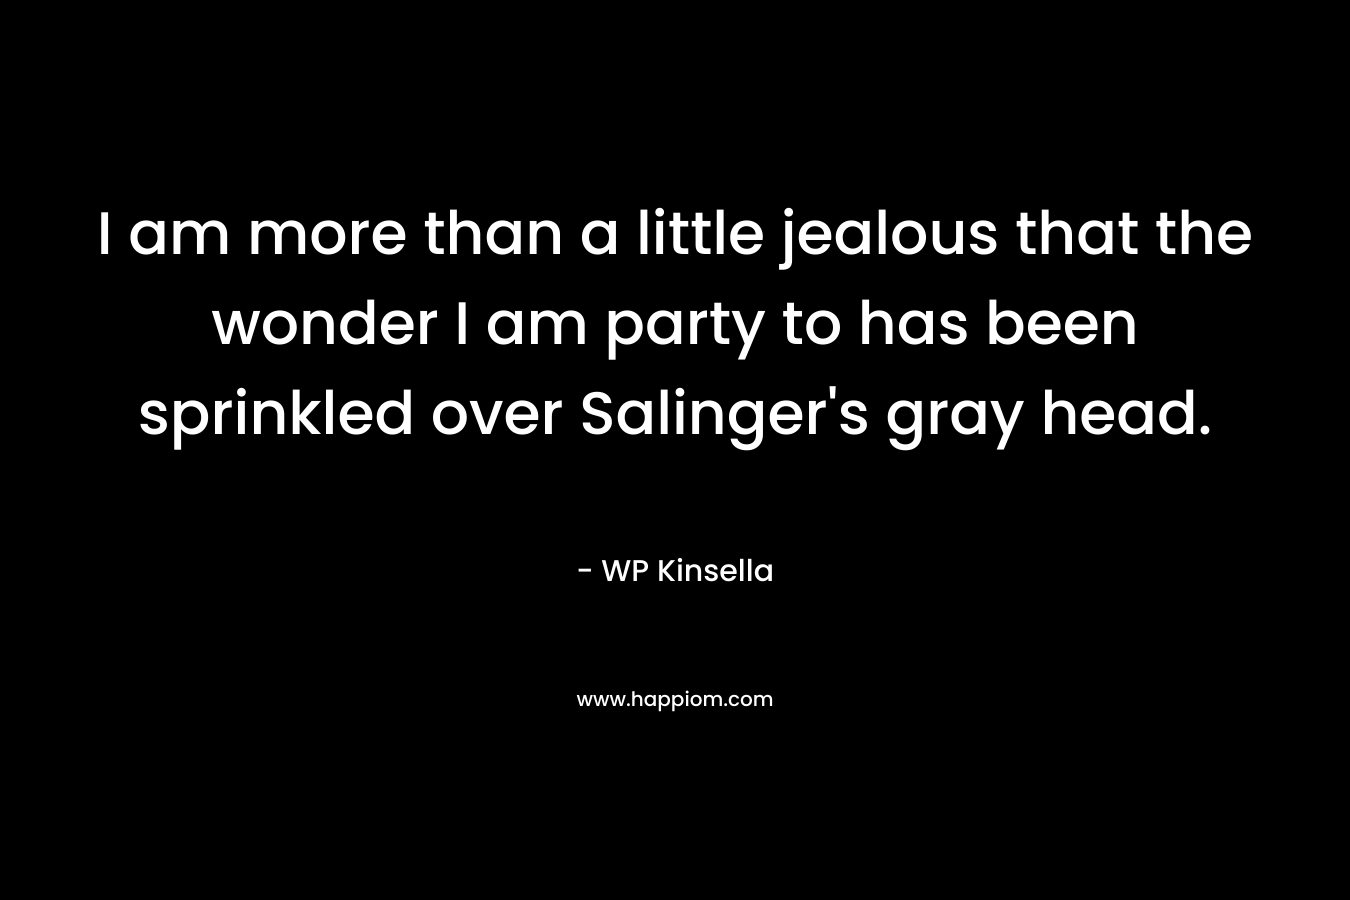 I am more than a little jealous that the wonder I am party to has been sprinkled over Salinger’s gray head. – WP Kinsella